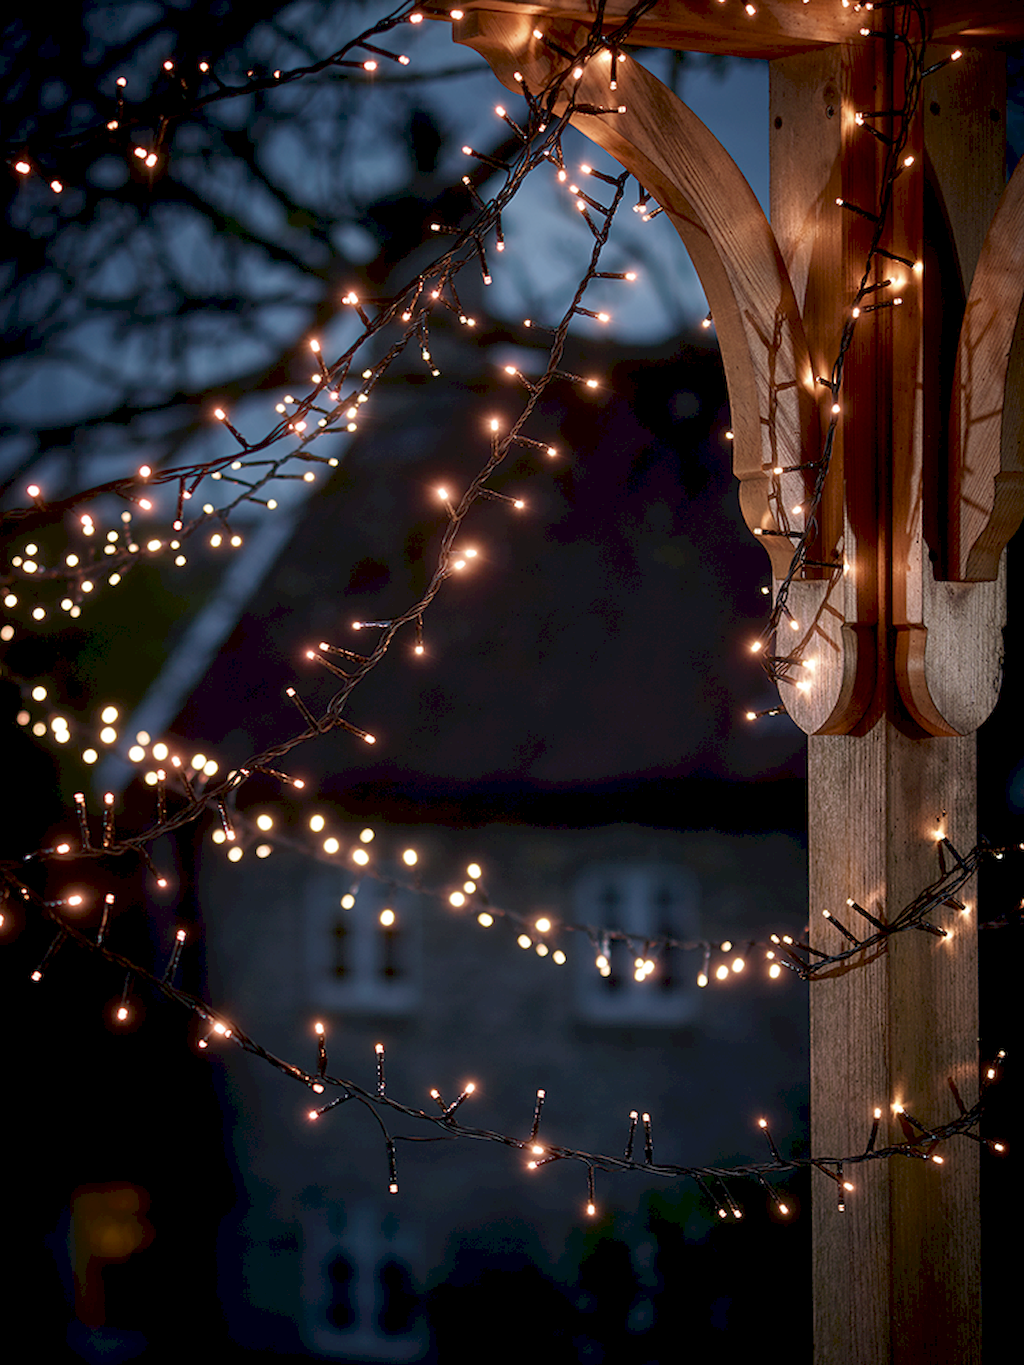 Outdoor Christmas Lights Decoration Ideas Home to Z. Lit wallpaper, Lights, Twinkle lights